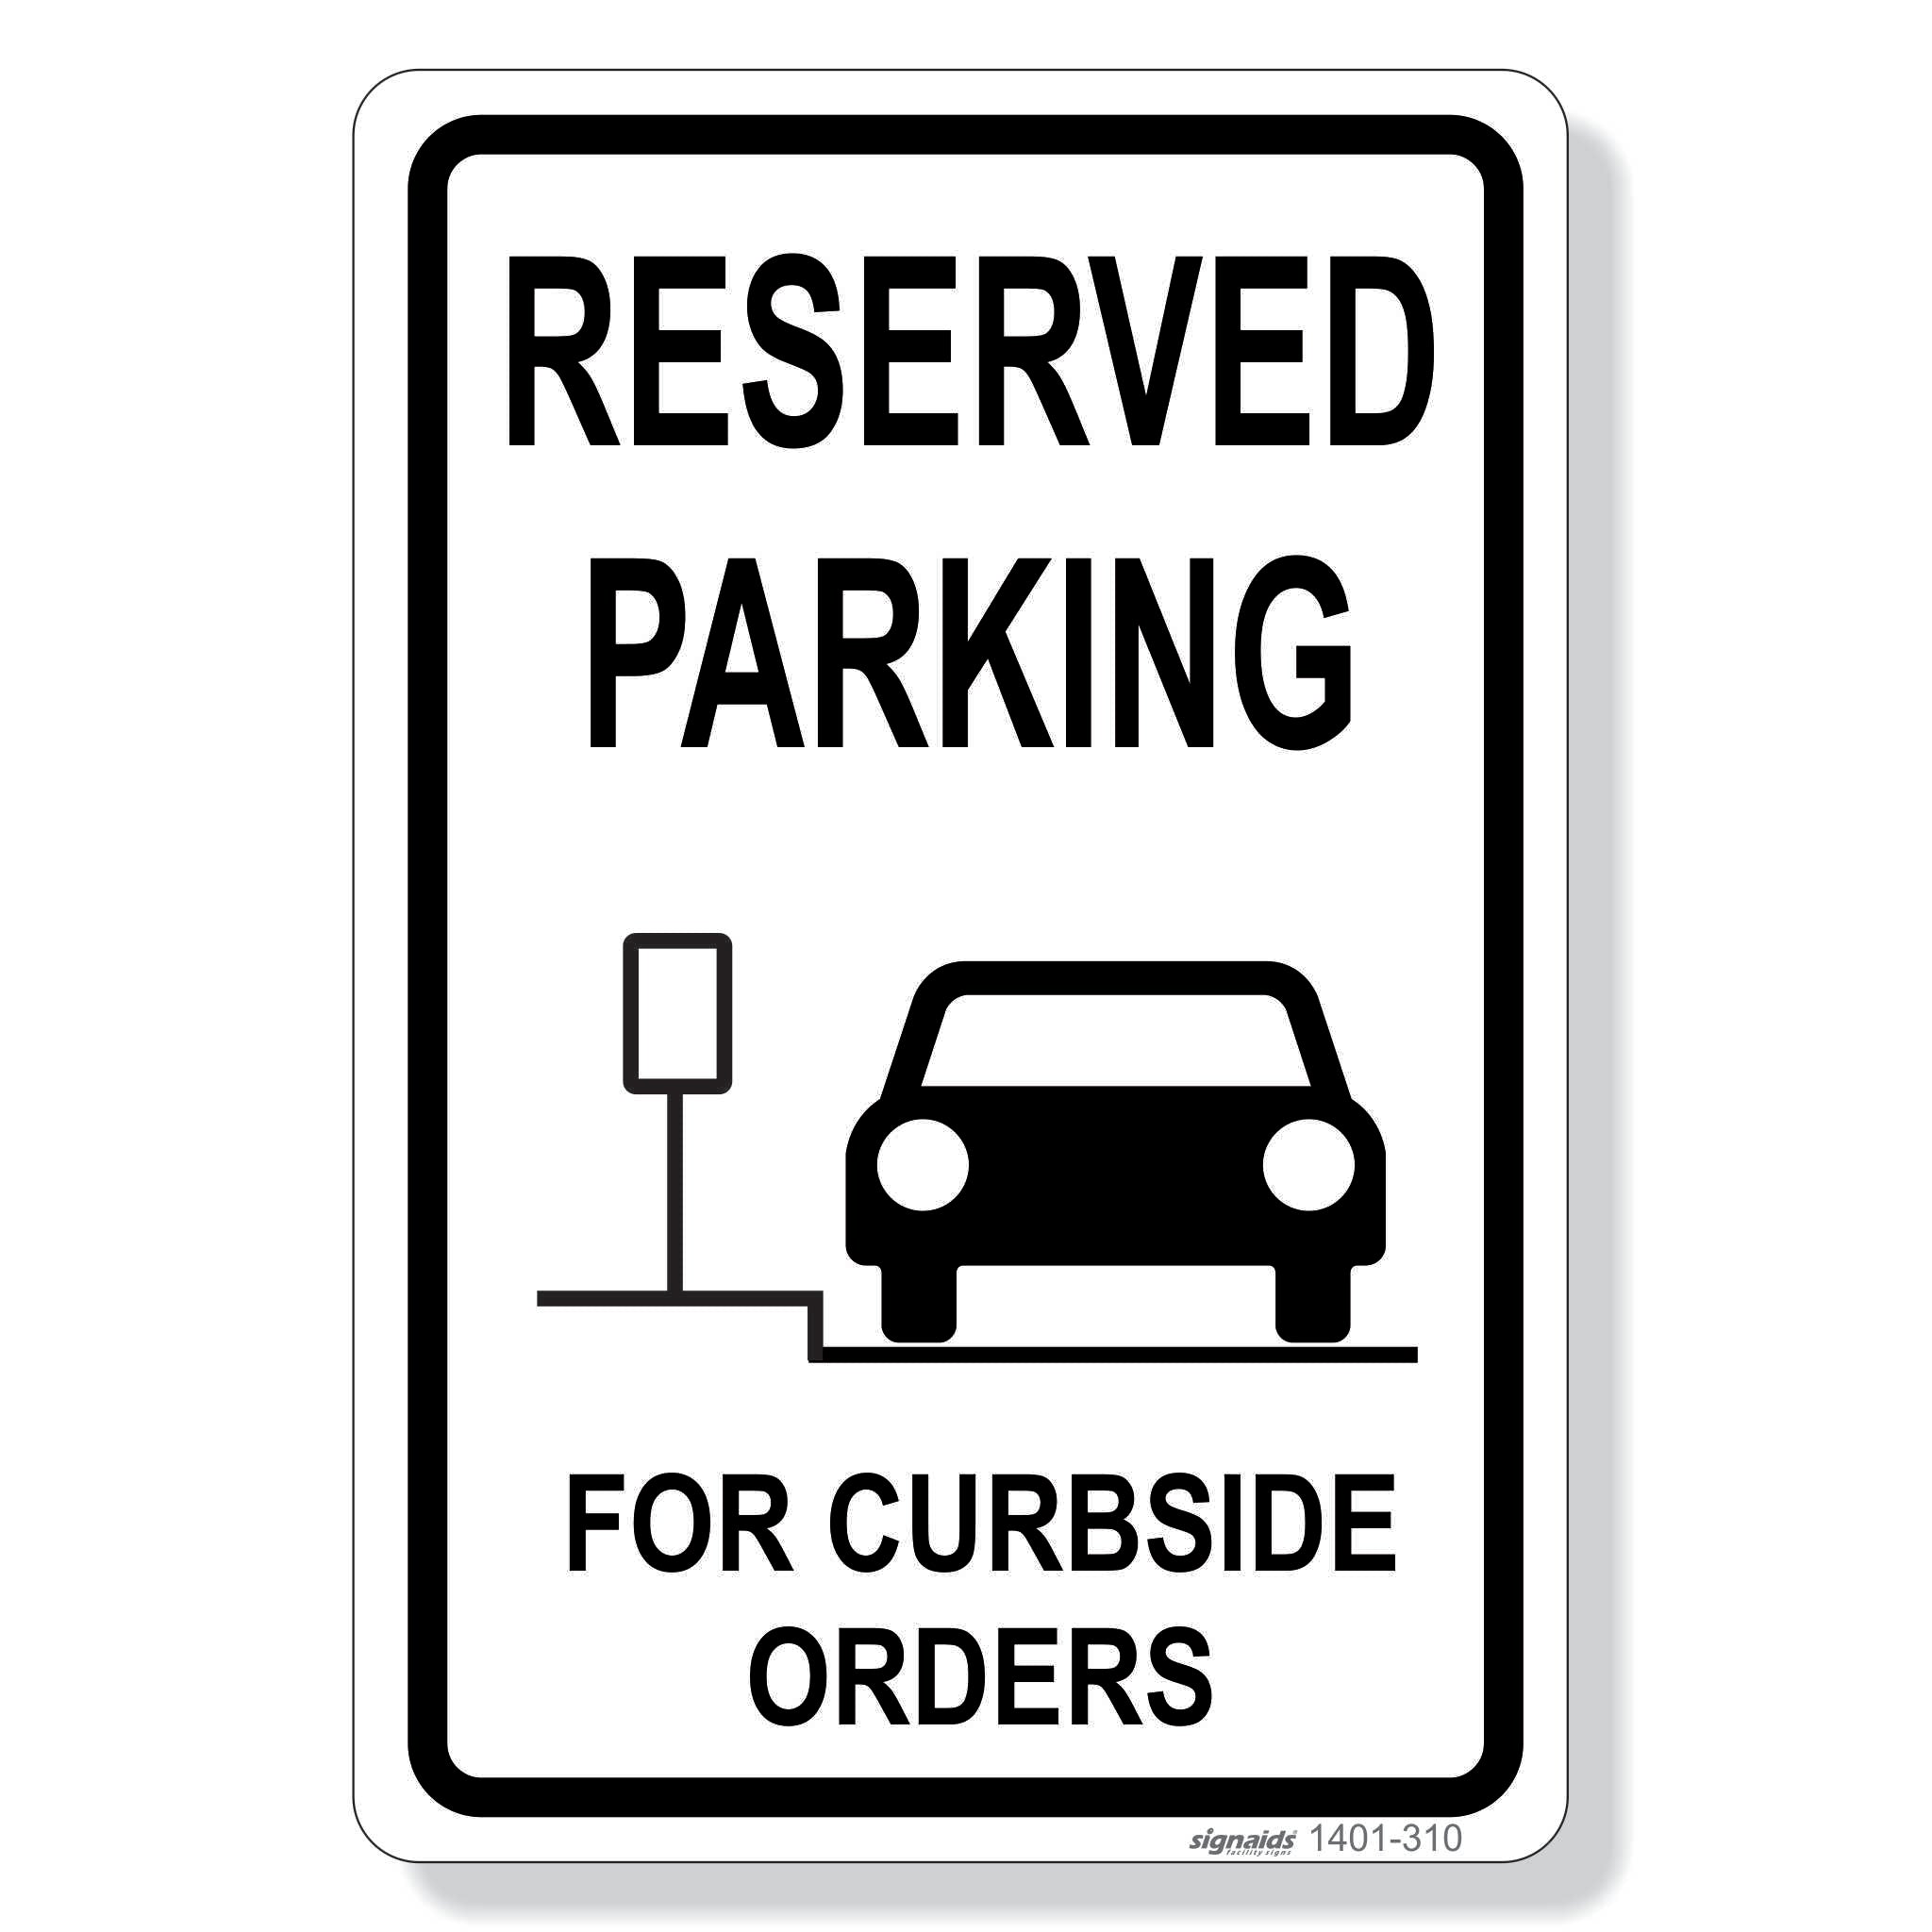 Parking Sign - Reserved Parking For Curbside Orders